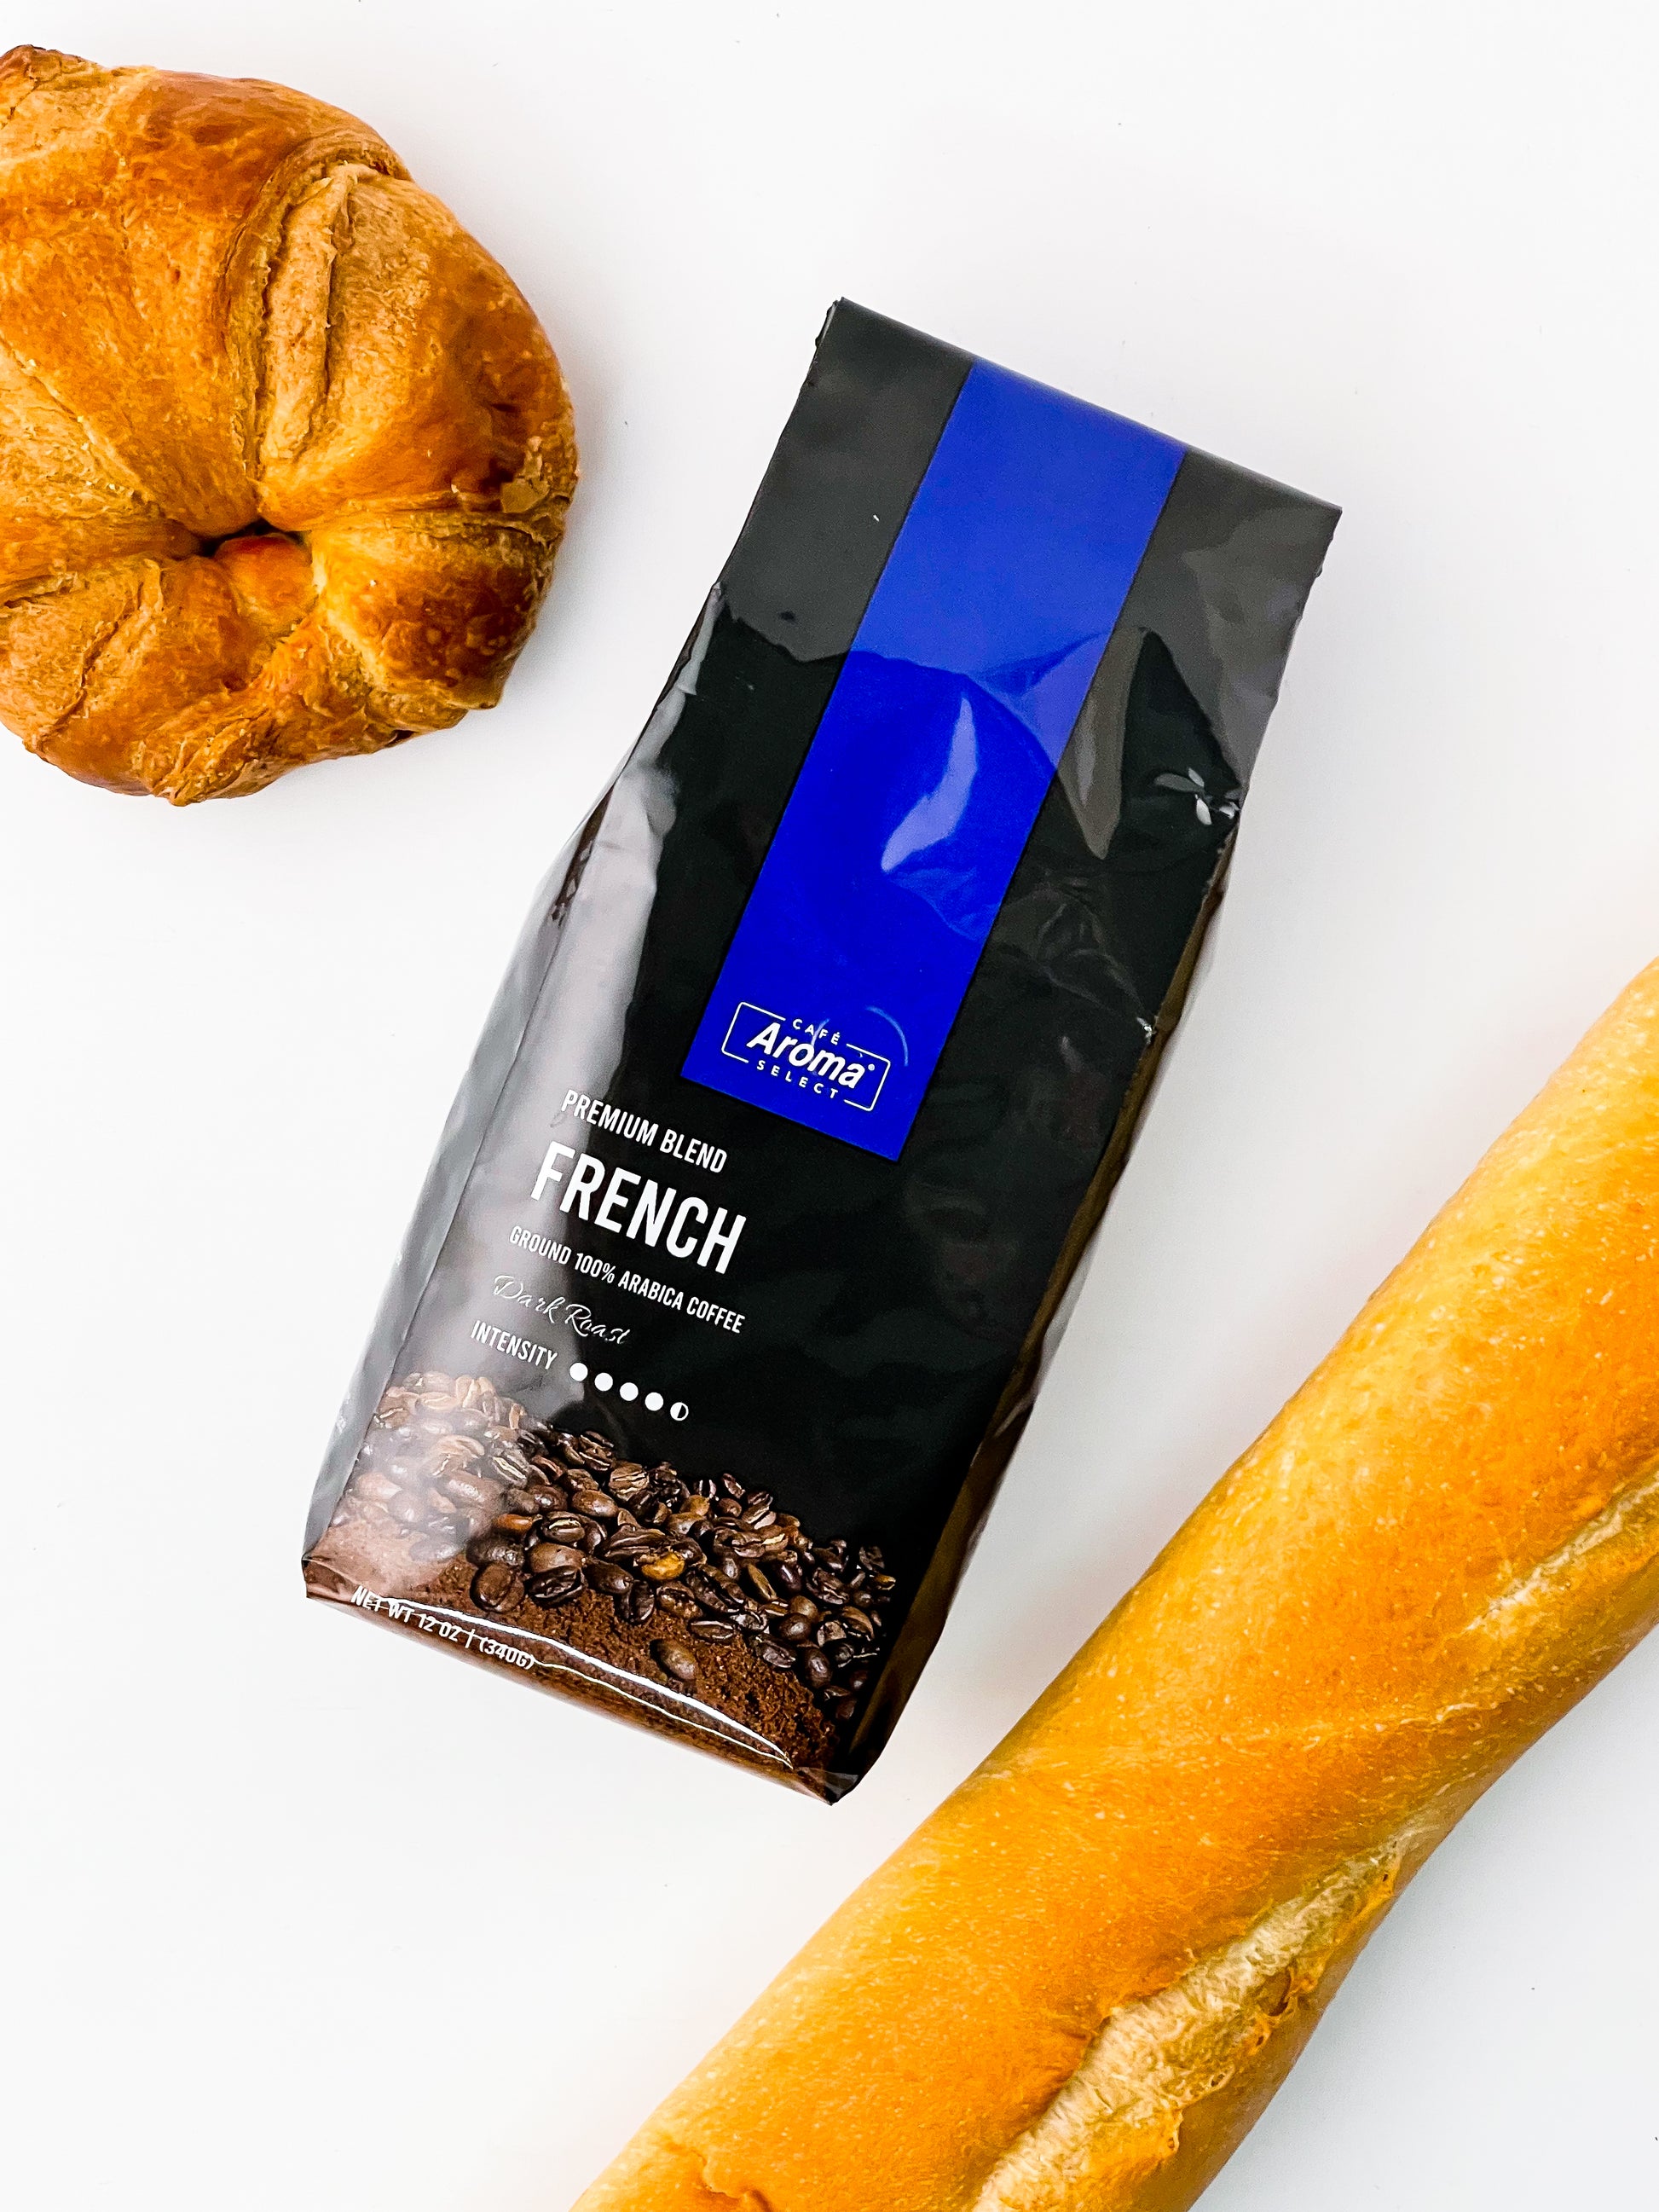 French bread and French ground coffee